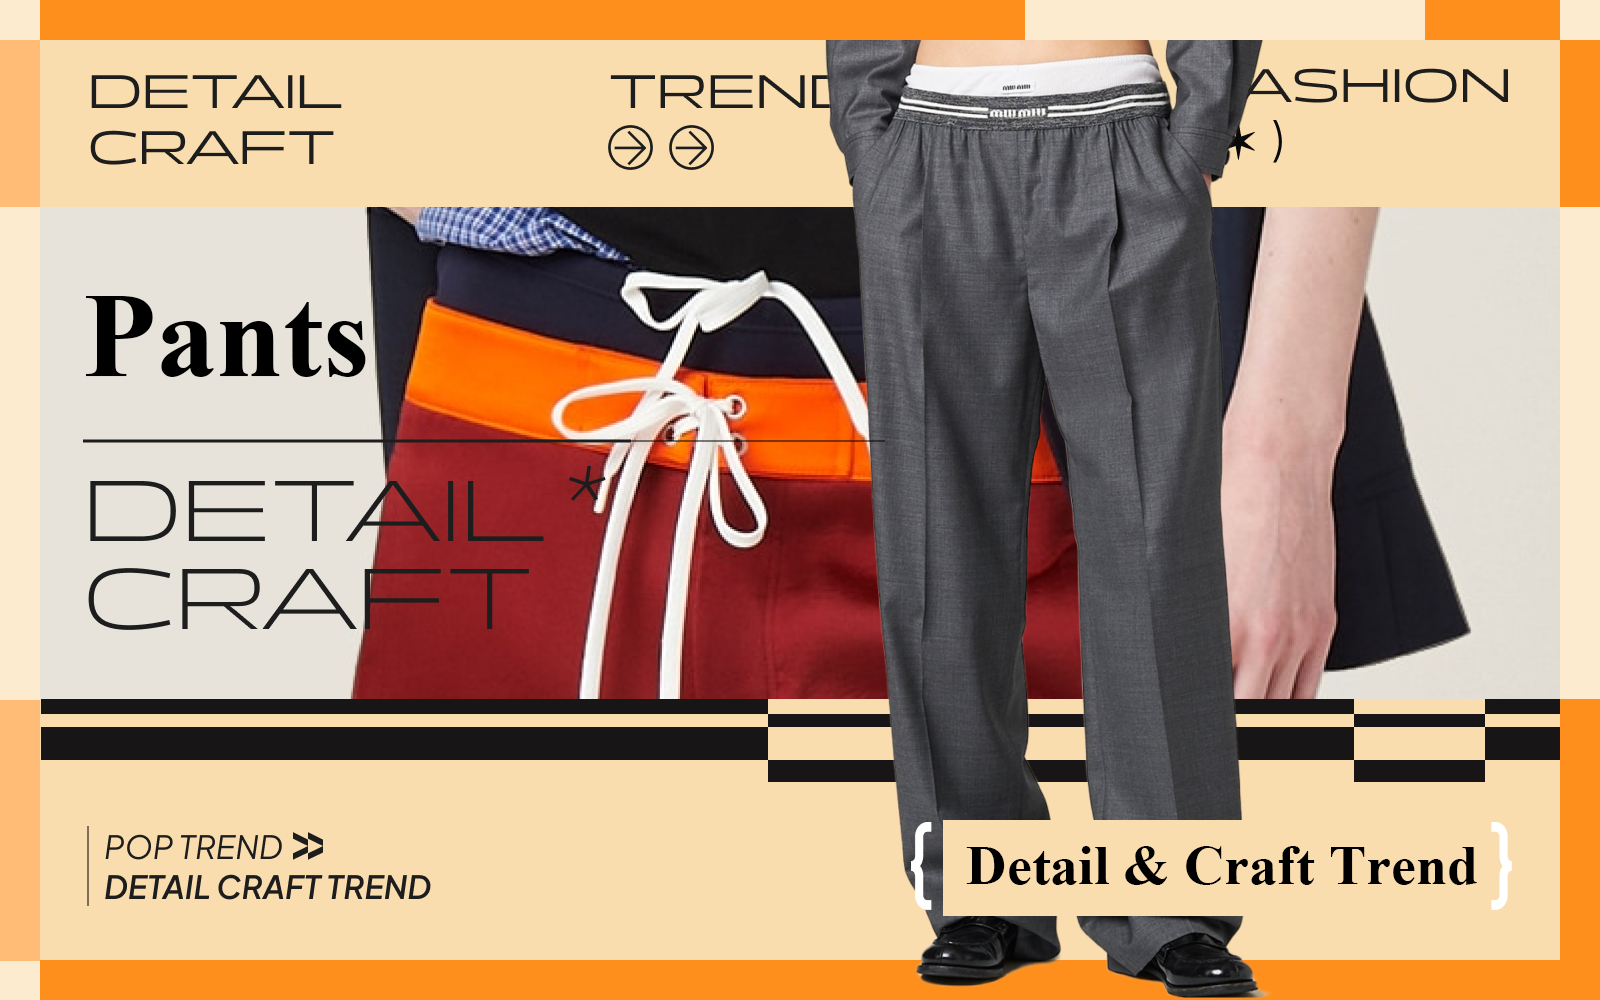 Waistband -- The Detail & Craft Trend for Women's Pants